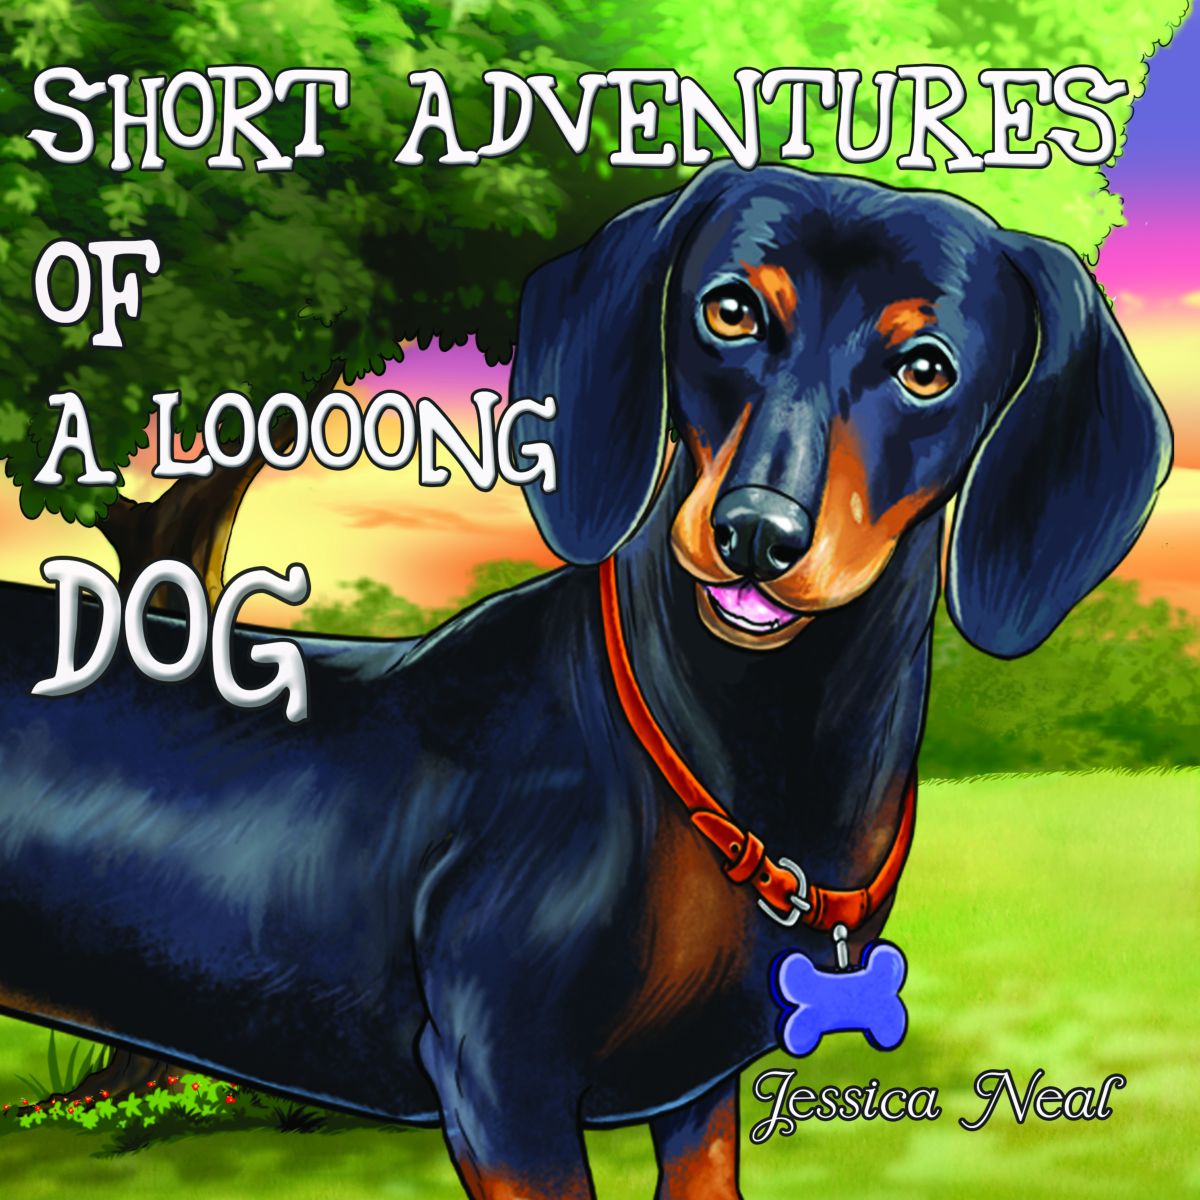 FREE: Short Adventures of a loooong Dog by Jessica Neal